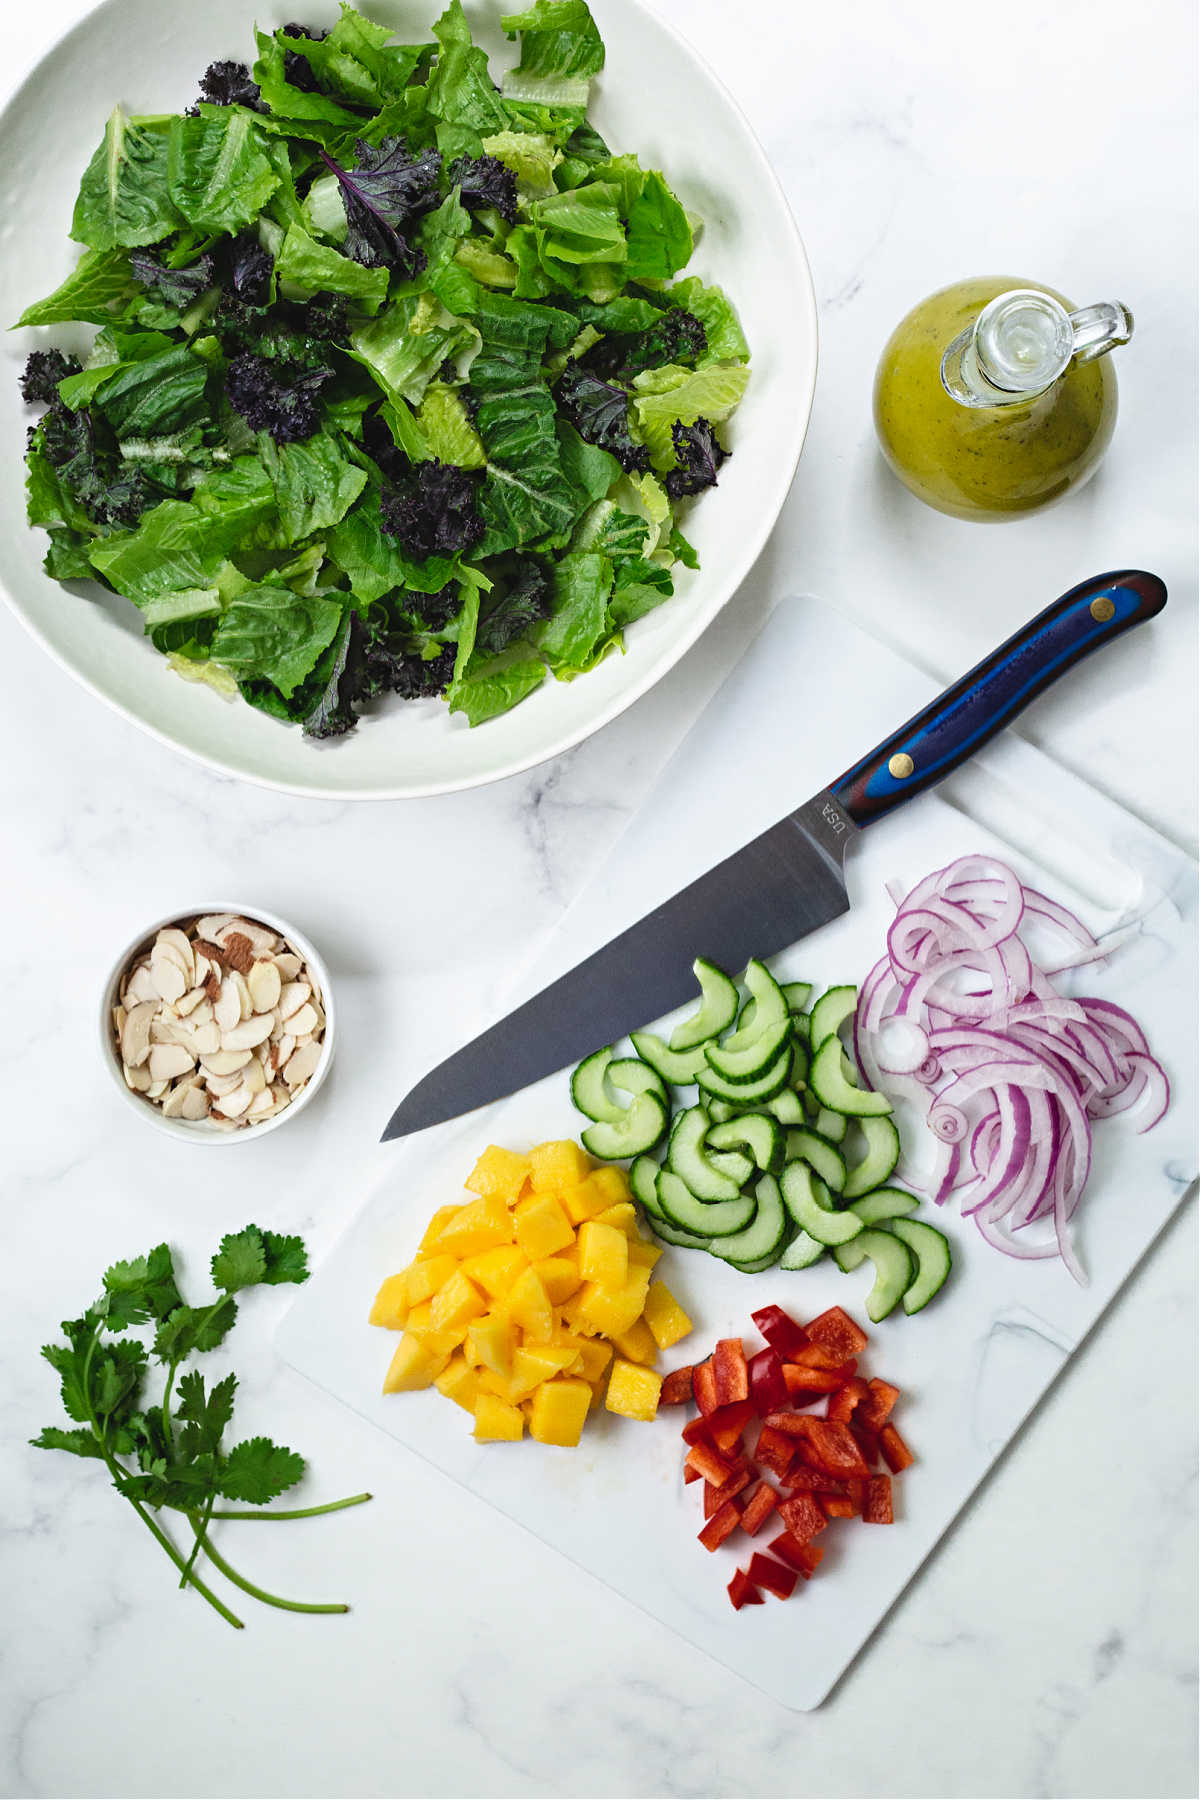 ingredients for grilled chicken salad on a counter: salad greens, sliced almonds, chopped onion, mango, red bell pepper, and cucumbers.